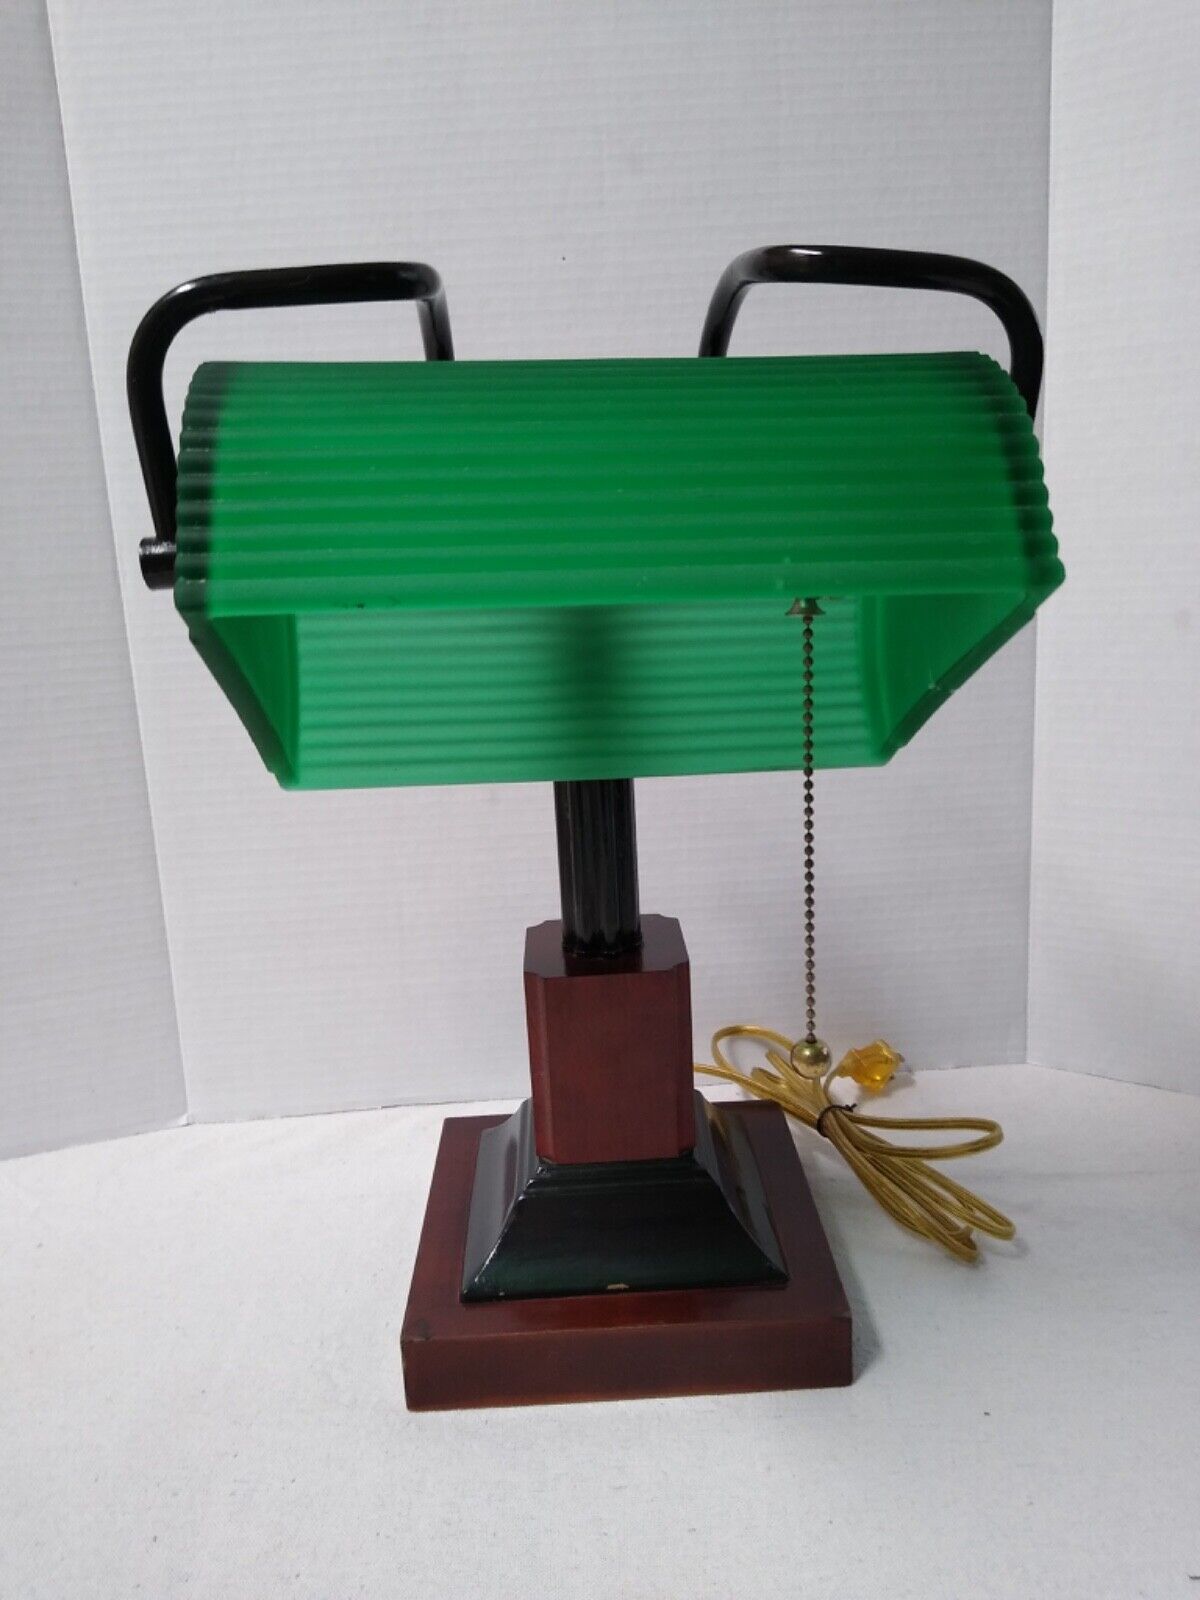 Vtg Rare Classic Bankers Lawyer Desk Lamp Green Frosted Fluted Thick Glass Shade